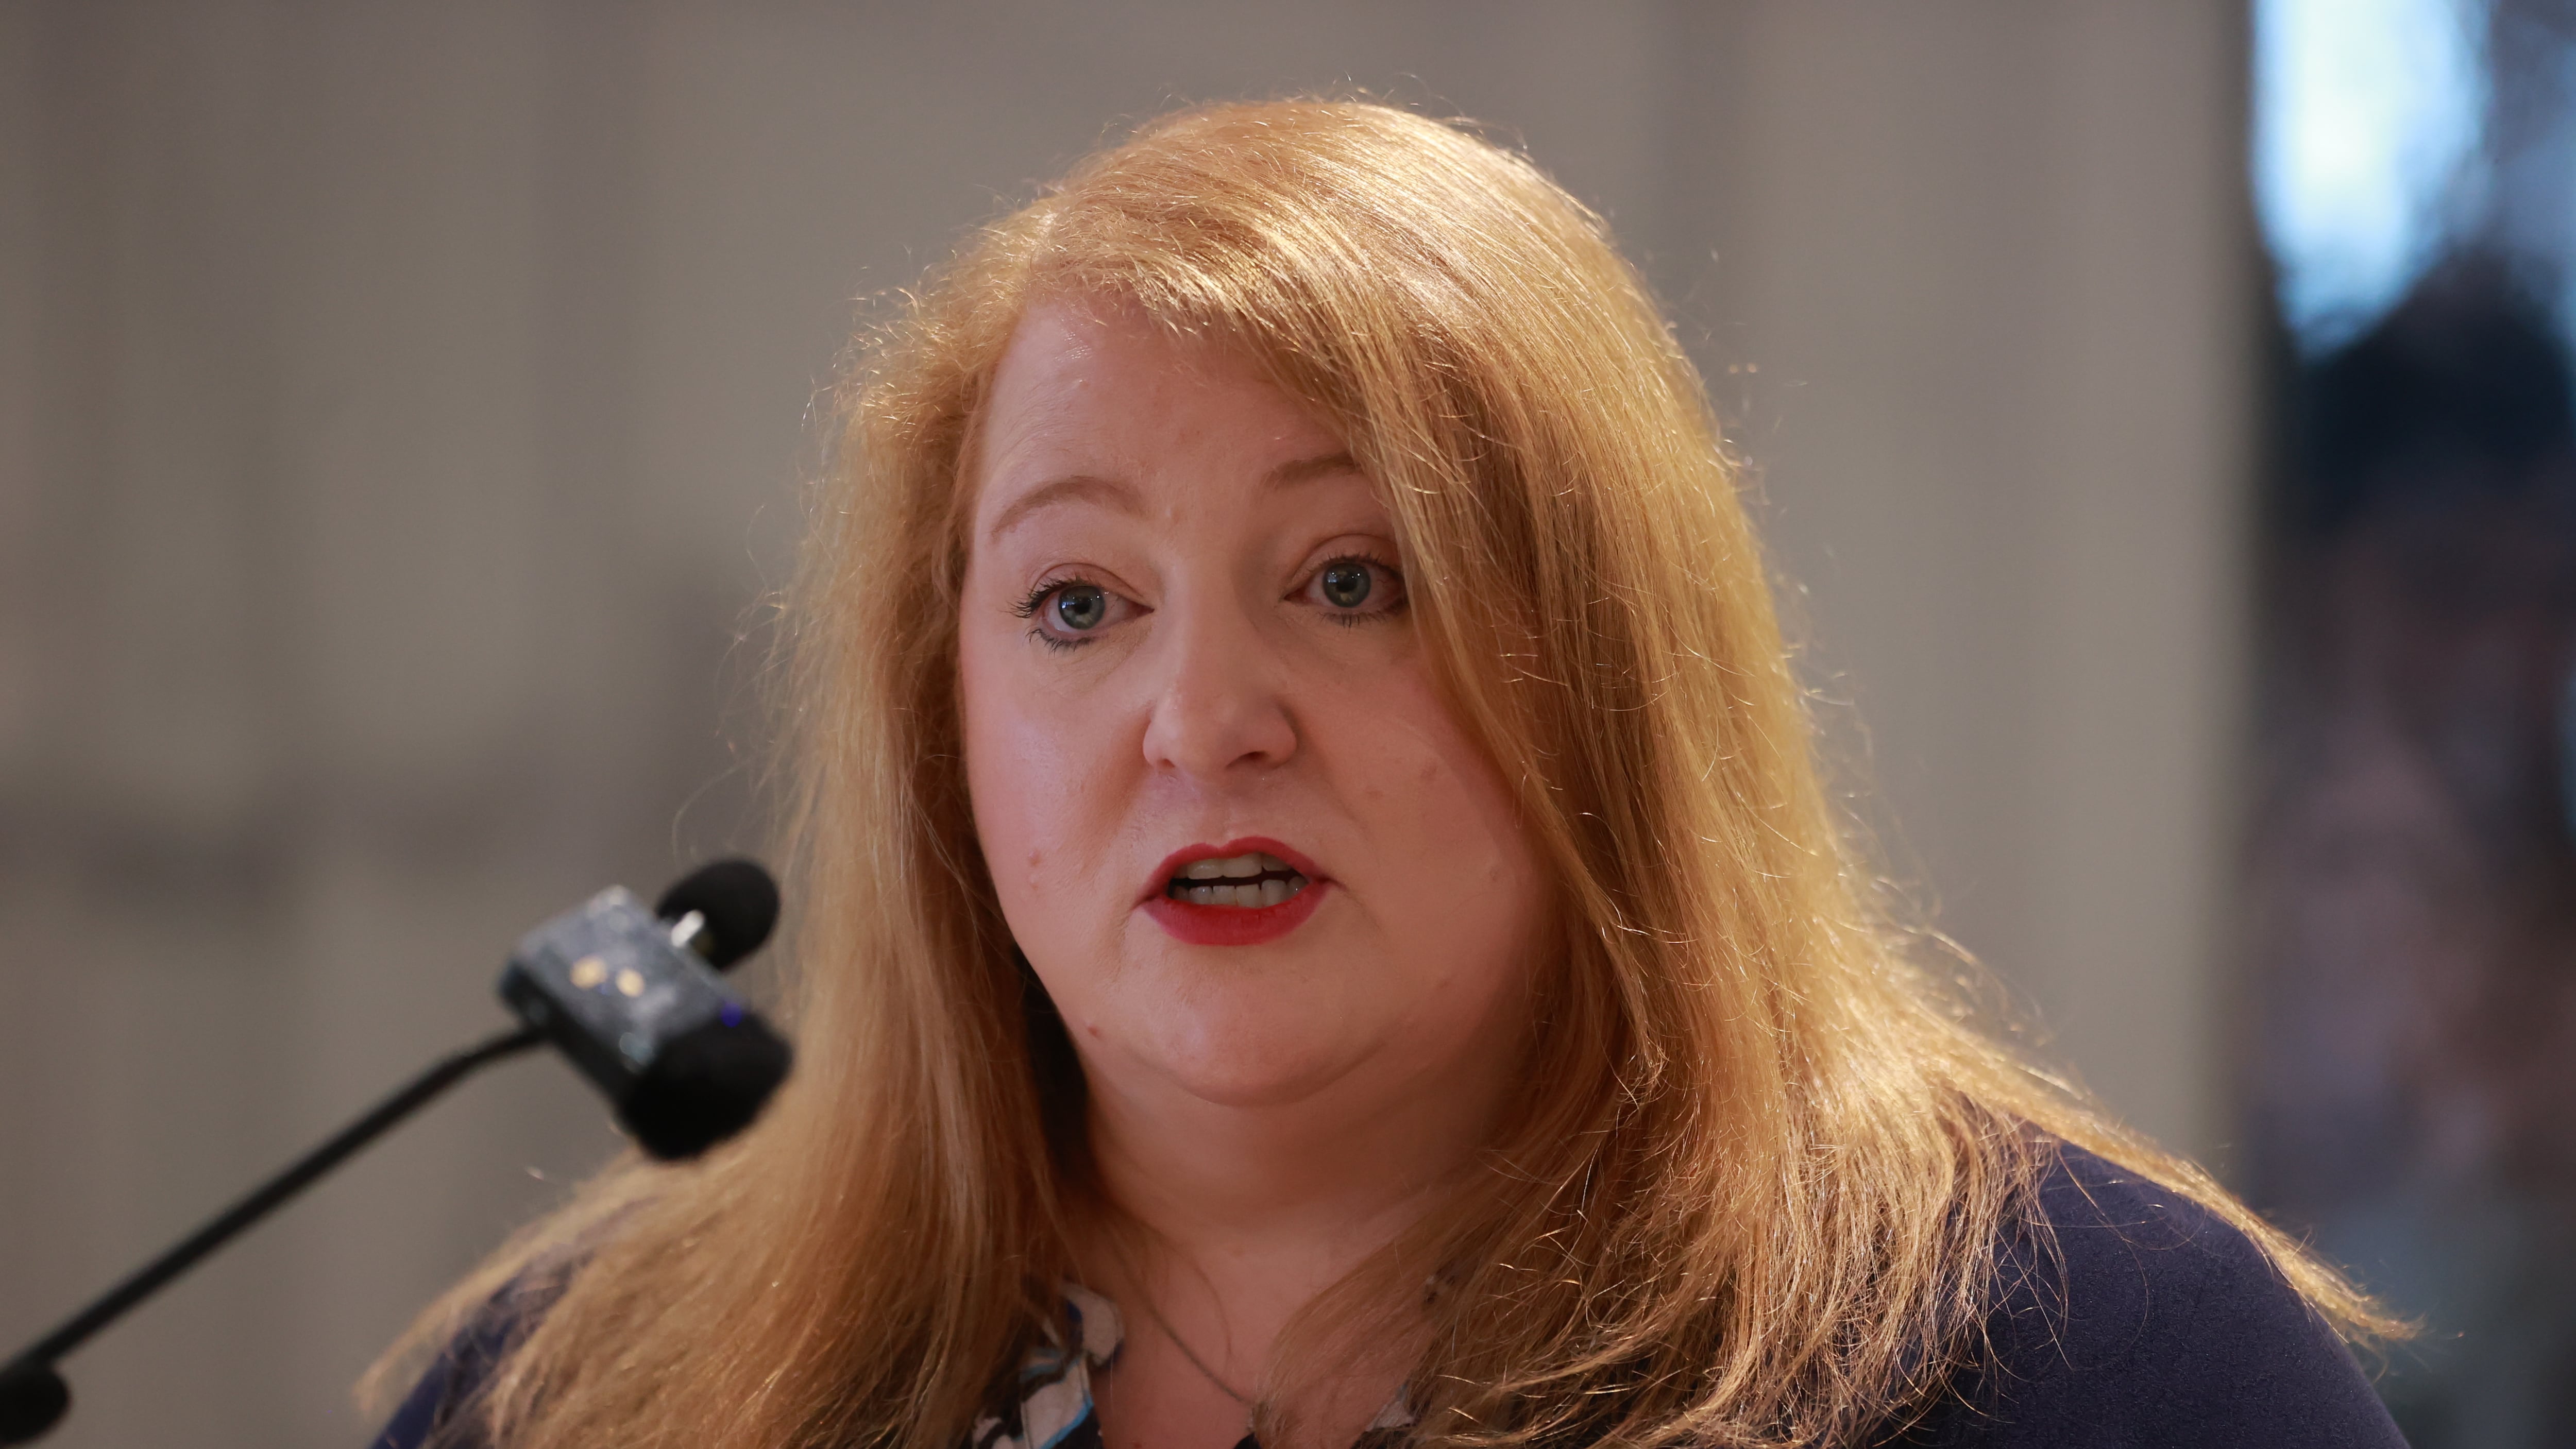 Justice Minister Naomi Long called for ‘cool heads’